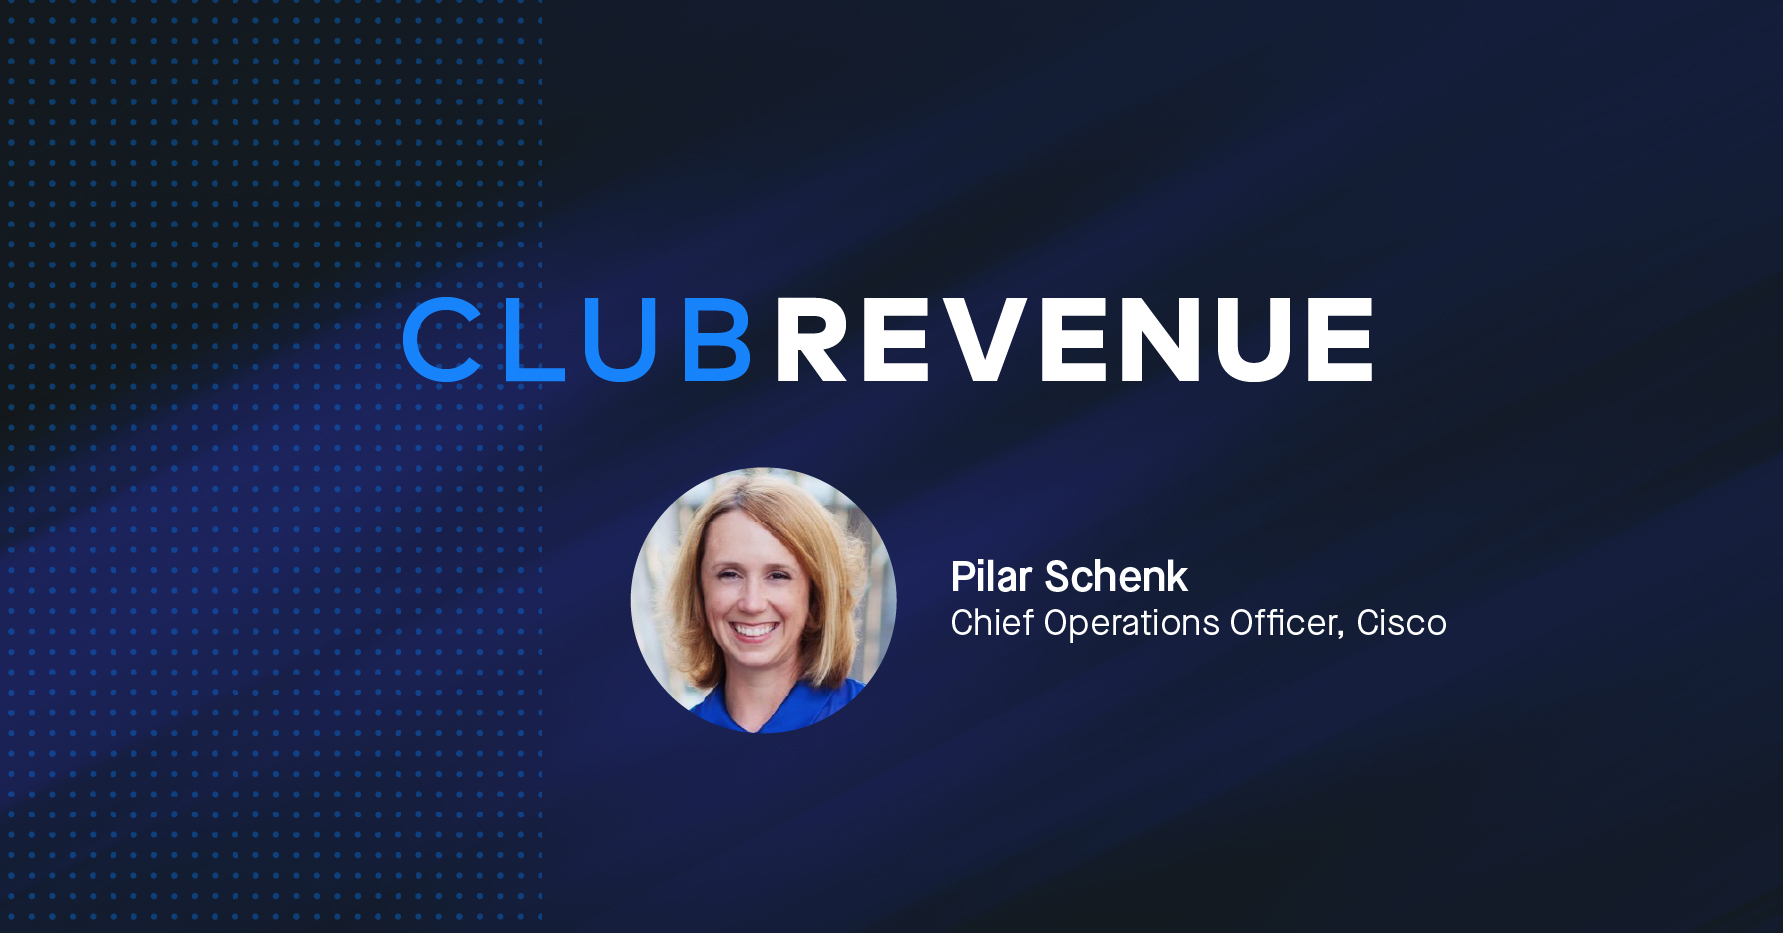 Banner that says Club Revenue with a headshot photograph of Pilar Schenk, Chief Operations Officer at Cisco